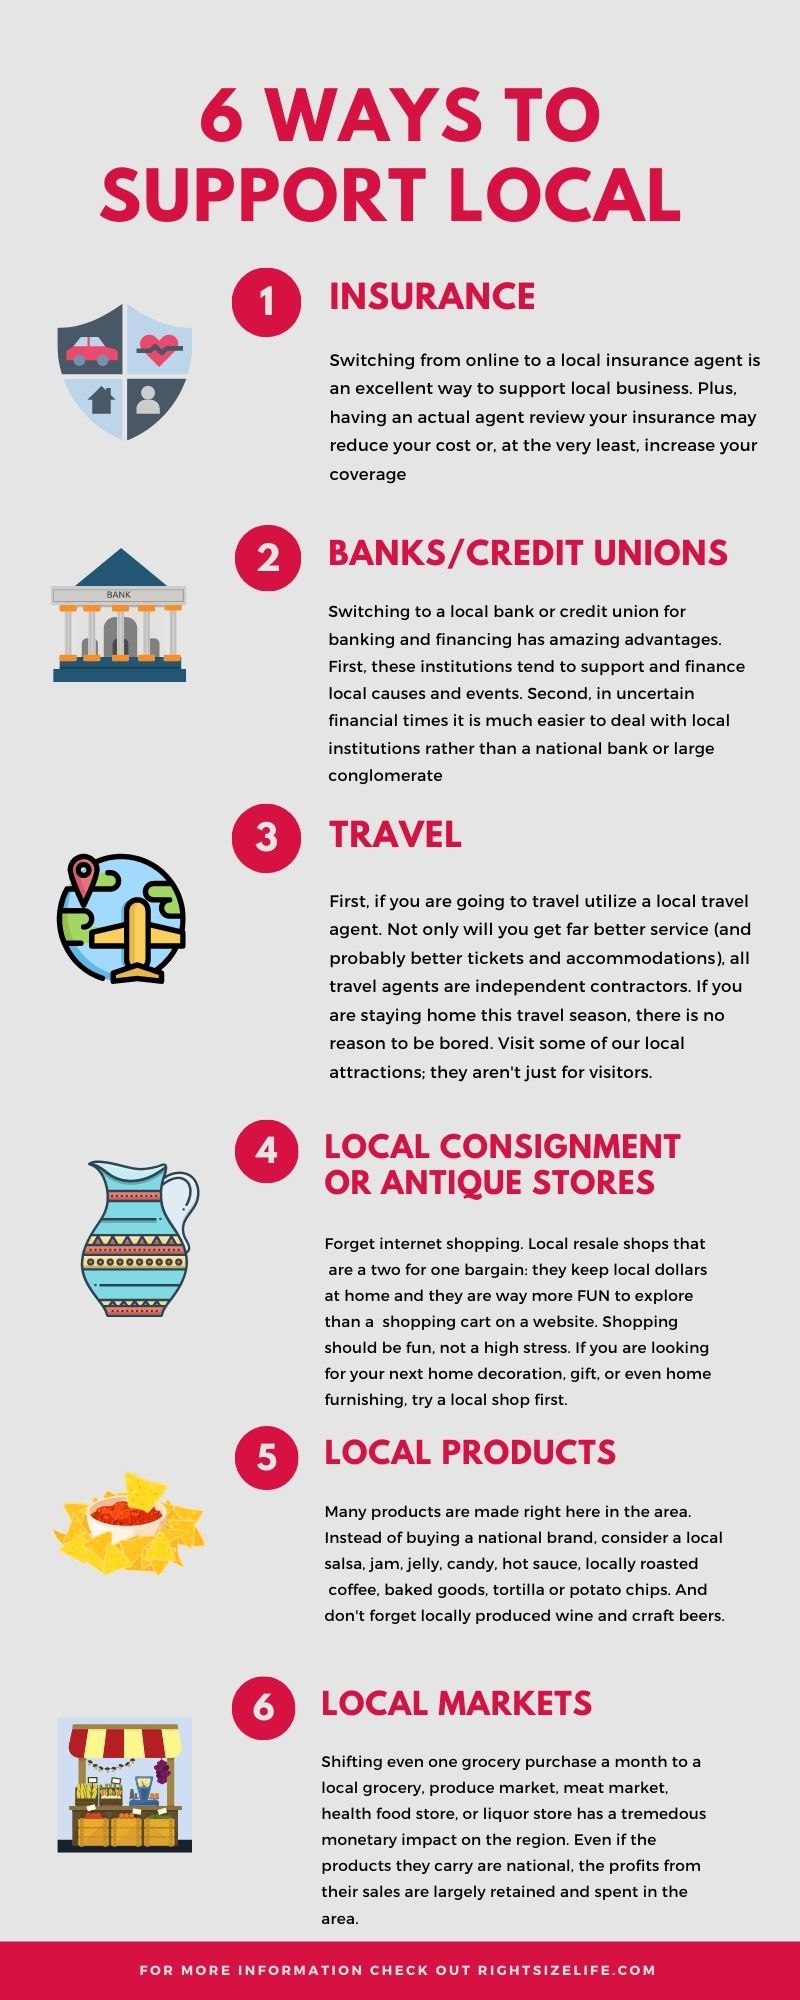 3 Ways to Shop Local on